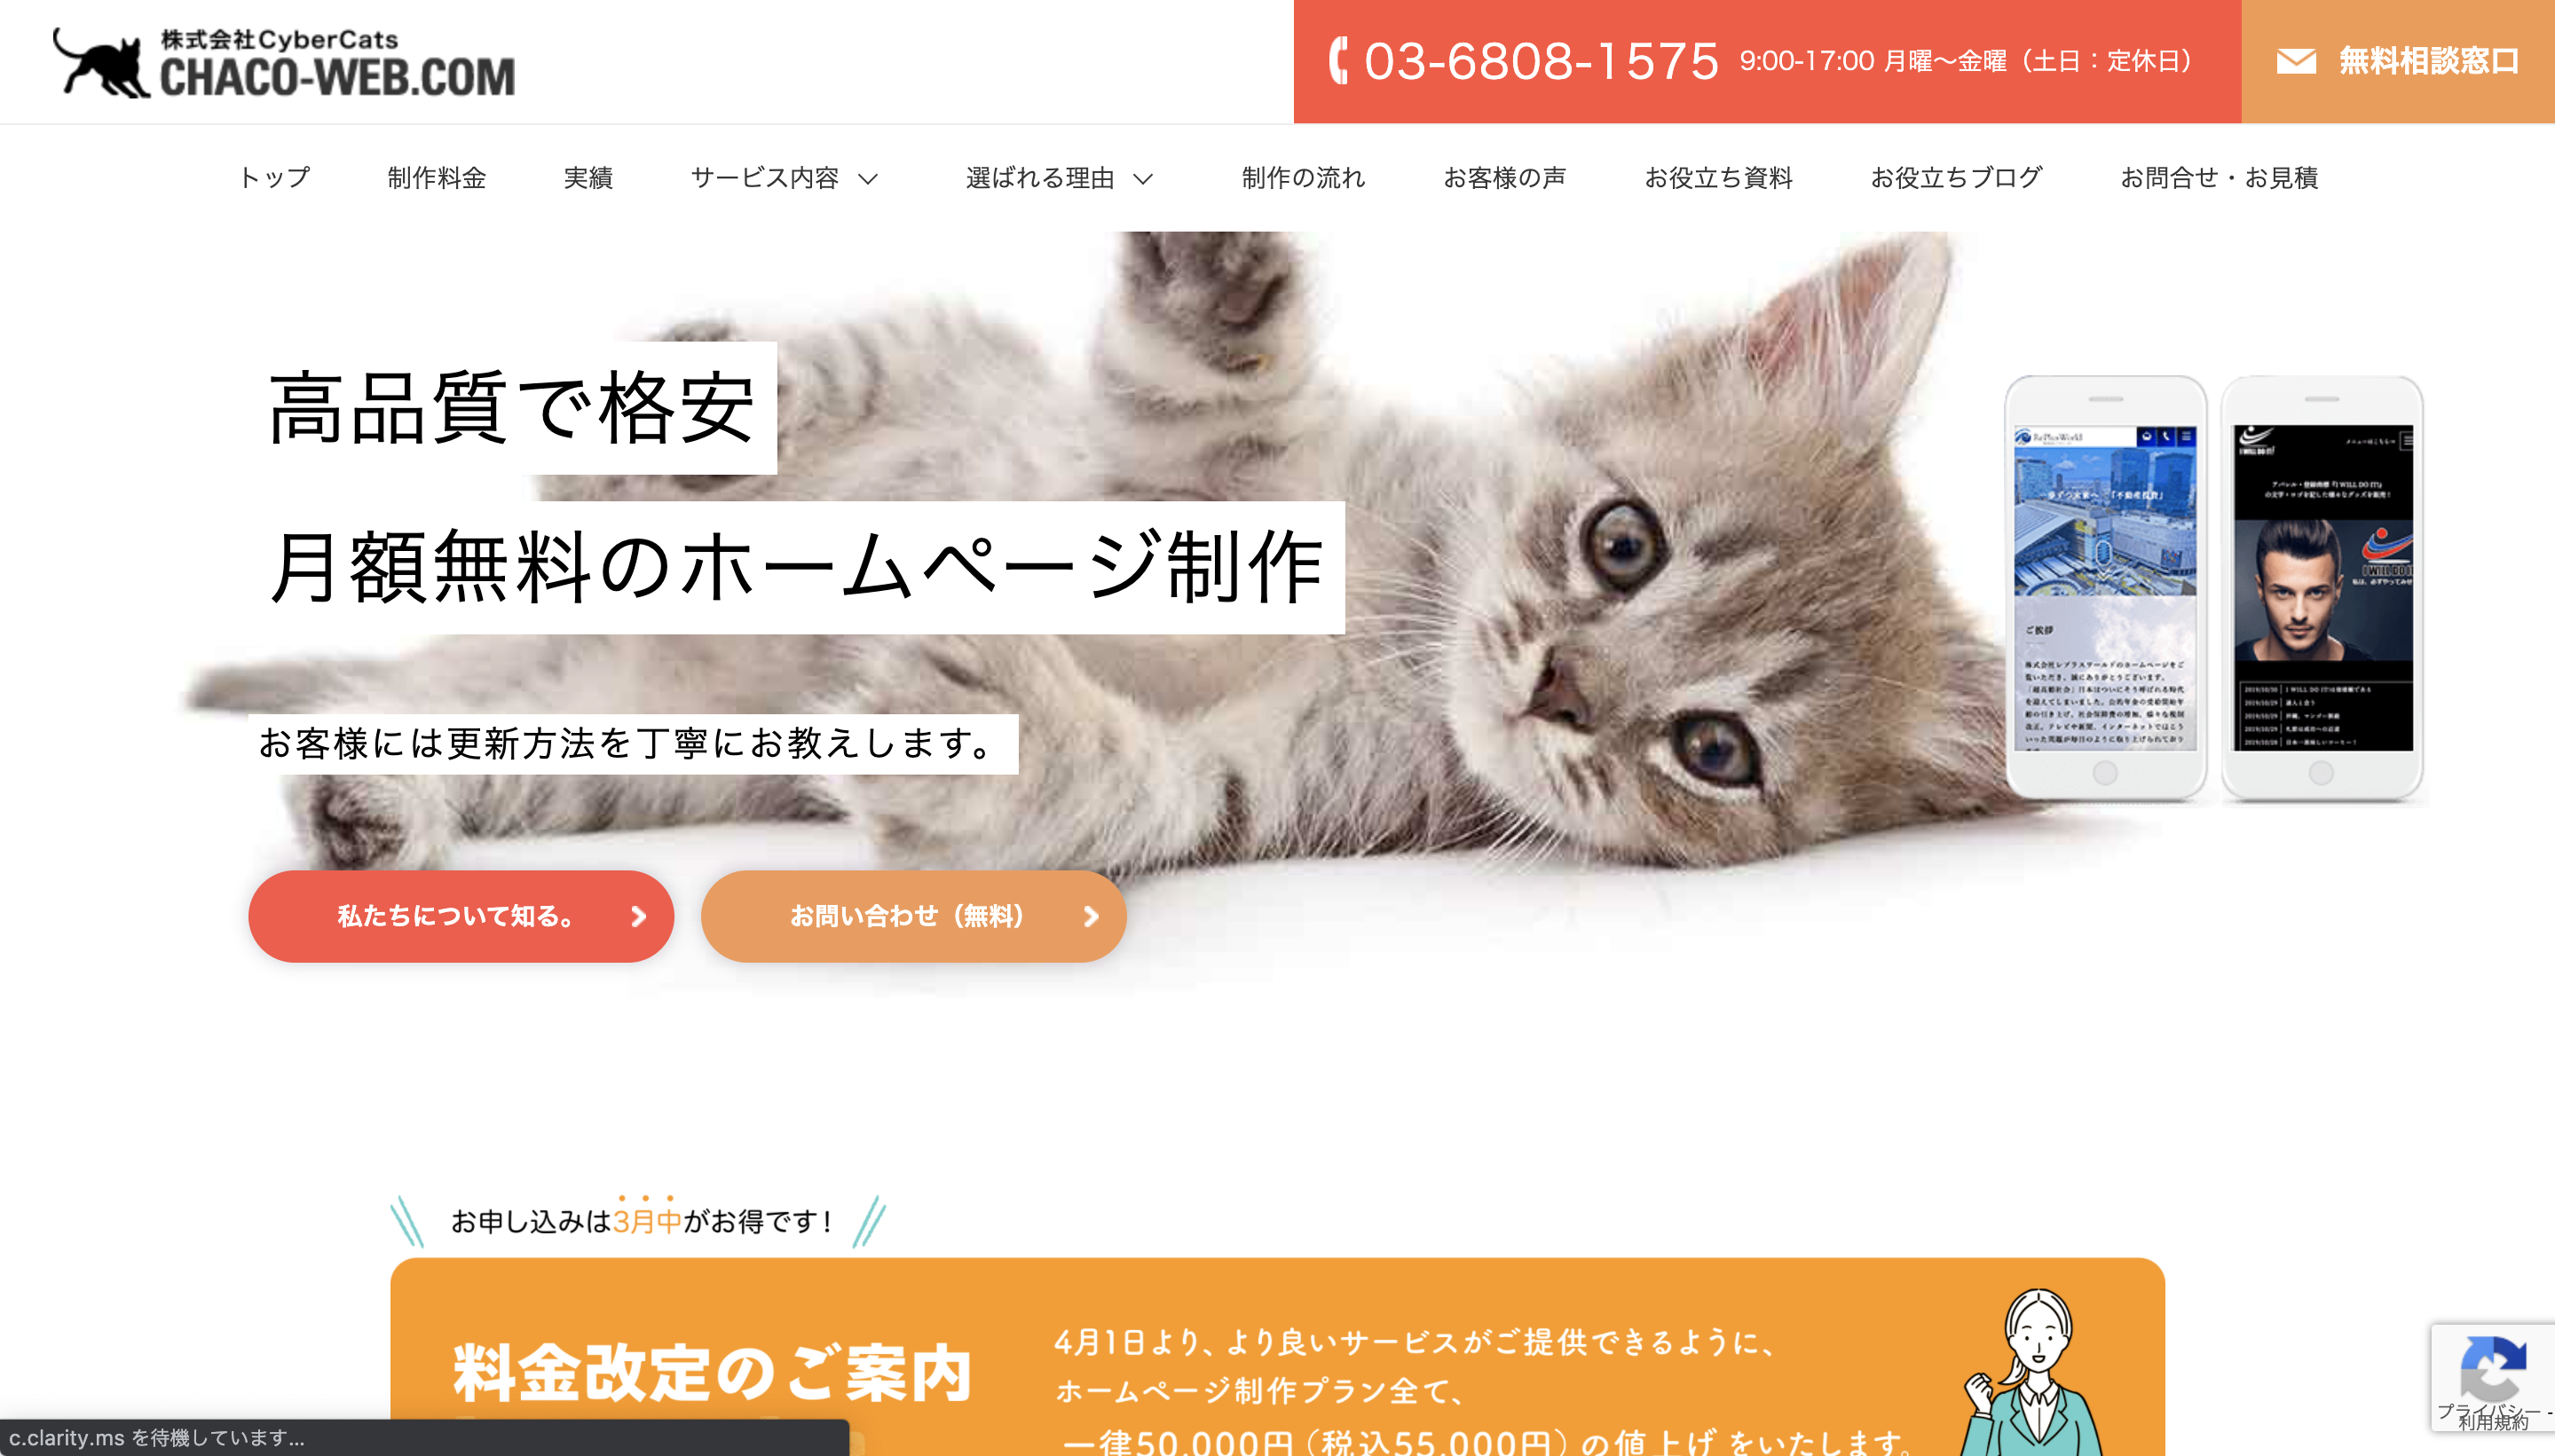 corporate-site-home-page-difference-cyber-cats